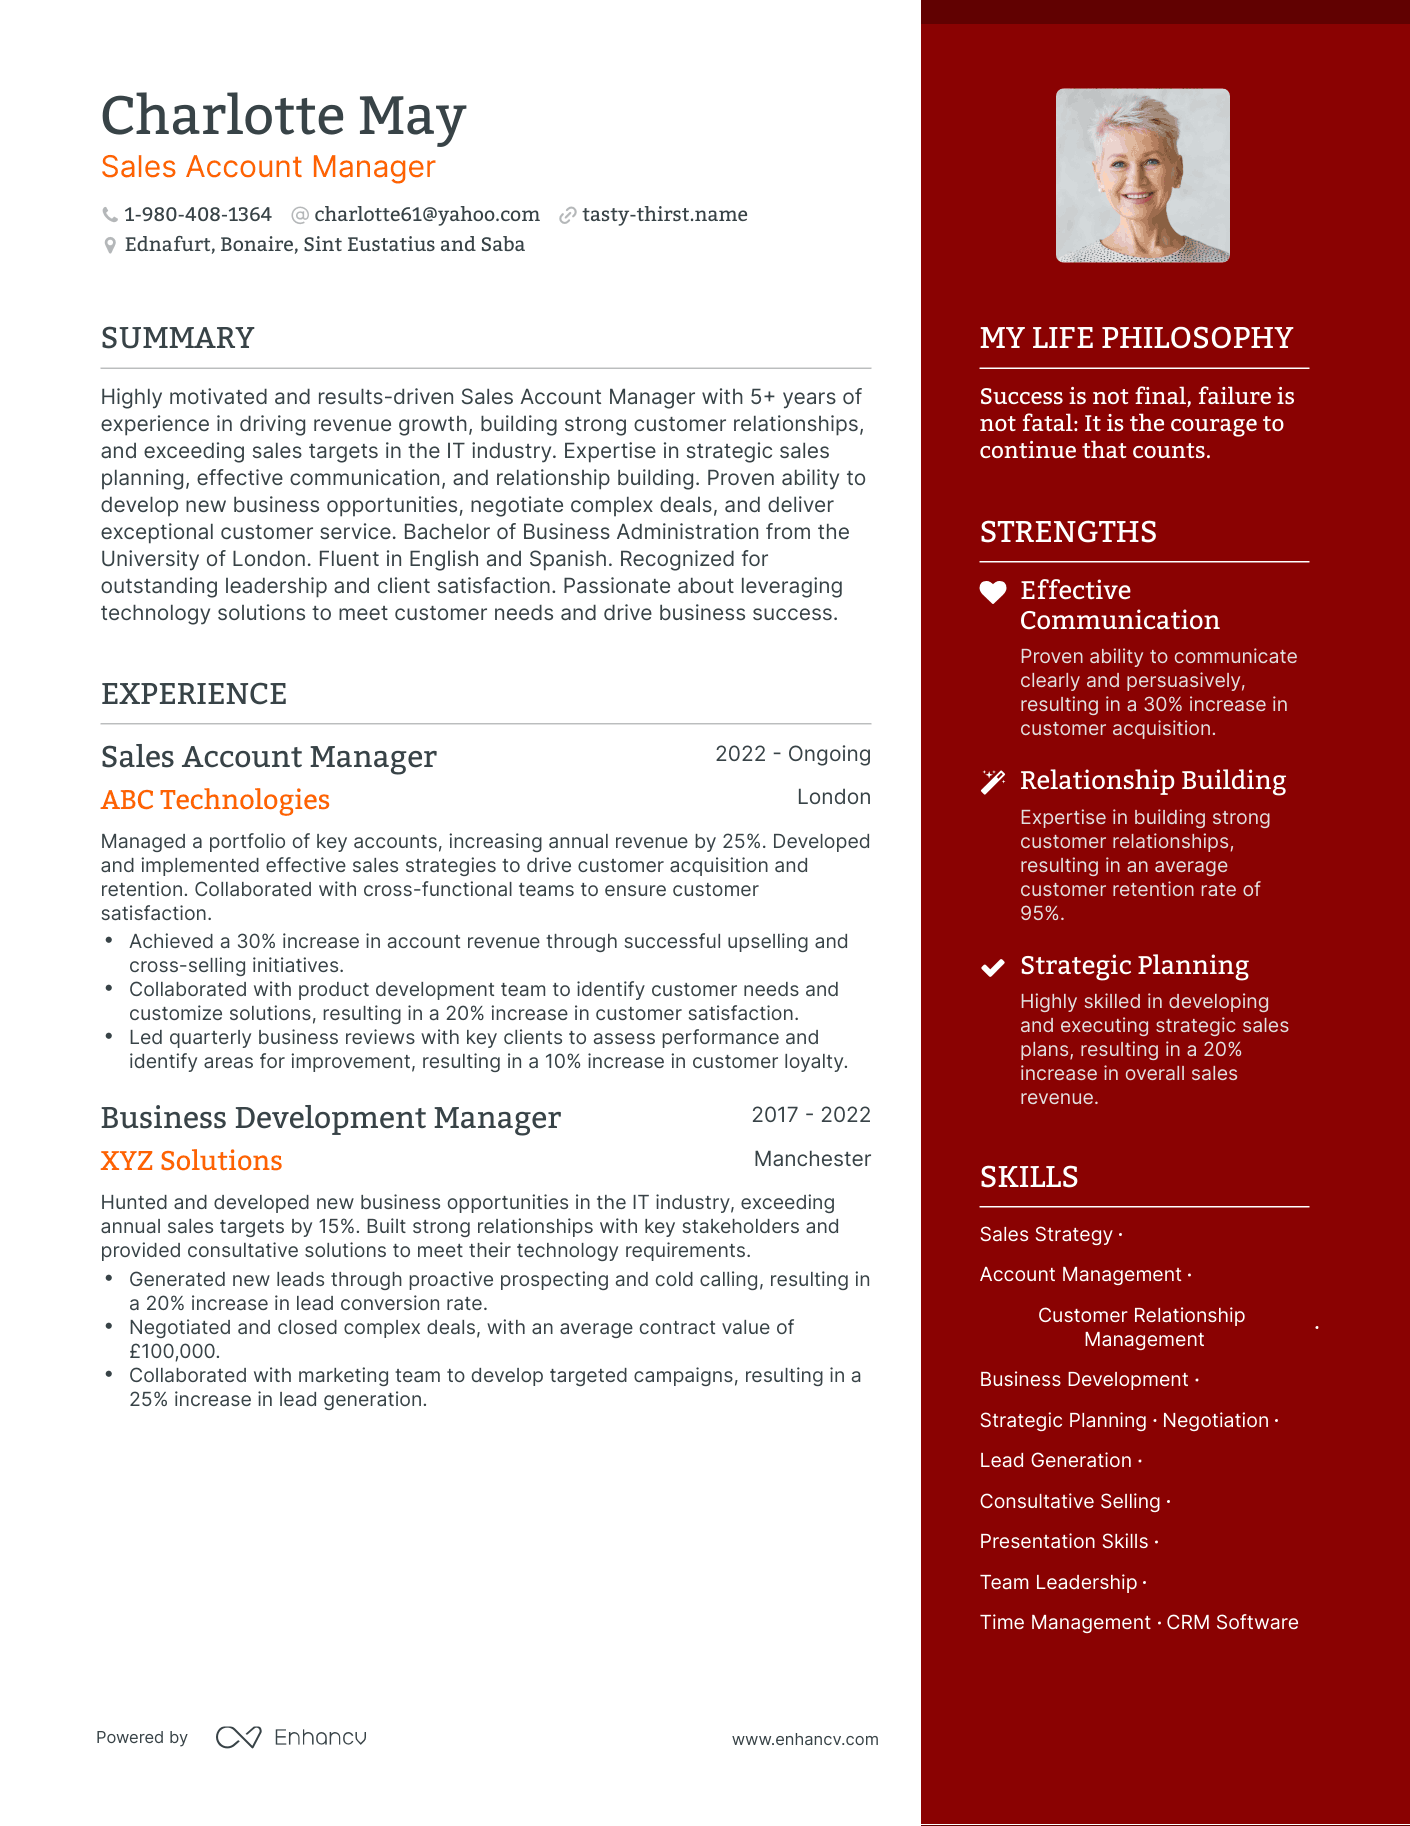 Sales Account Manager resume example